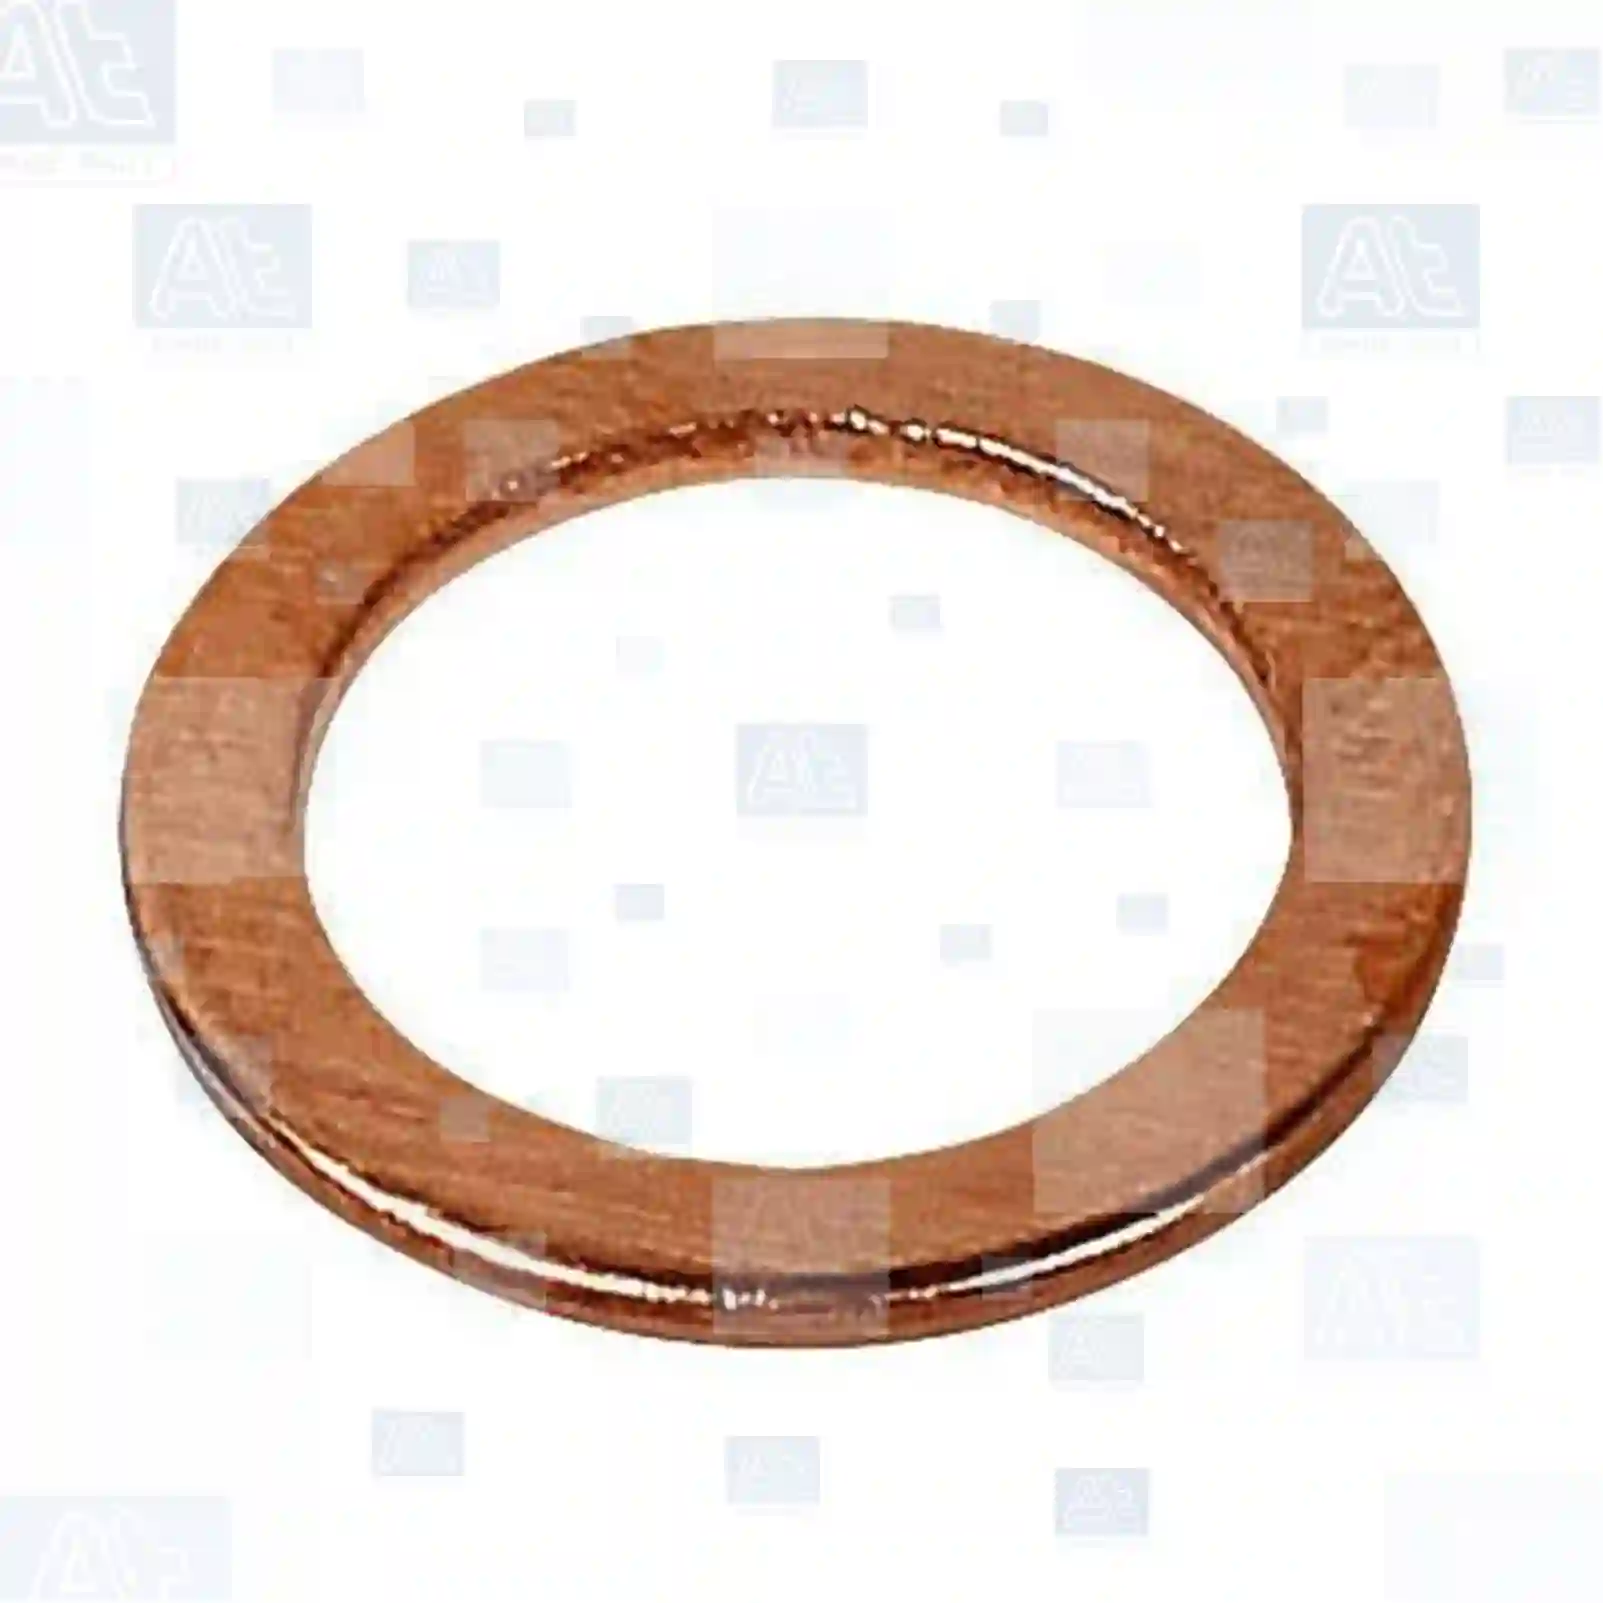 Copper washer, 77724842, 10261160, 234032235, N0138141, N0138492, N138492, 07119963226, 5073945AA, 5073946AA, 117005, 134211, 11023582, 11023589, 94525114, 0244680, 244680, 01118688, 01118693, 01290877, 01301223, 5073946AA, 10280060, 1005306, 209725, 228195, 11023580, 11023582, 94525114, 0996731011, 0996731012, N007603014102, N007603014106, 933610R1, 16508160, 5073946AA, 01118693, 01301223, 7101008, 06561900706, 995641400, 000000001069, 007603014106, 007603014108, 07119963201, MN960041, 01118688, 01118693, 604920101418, 604920101420, 11026-HG00B, 2091046, 4803630, 117005, 134211, 0003008058, 0870073700, 5000254857, 7400969011, 7703062043, 7522709, 8728051, 192633, 303098, 461924, N0138141, N0138492, N138492, N0138141, N0138492, N138492, 90003098015, 13947621, 18671, 186718, 969011, N0138492, N138492, ZG40226-0008 ||  77724842 At Spare Part | Engine, Accelerator Pedal, Camshaft, Connecting Rod, Crankcase, Crankshaft, Cylinder Head, Engine Suspension Mountings, Exhaust Manifold, Exhaust Gas Recirculation, Filter Kits, Flywheel Housing, General Overhaul Kits, Engine, Intake Manifold, Oil Cleaner, Oil Cooler, Oil Filter, Oil Pump, Oil Sump, Piston & Liner, Sensor & Switch, Timing Case, Turbocharger, Cooling System, Belt Tensioner, Coolant Filter, Coolant Pipe, Corrosion Prevention Agent, Drive, Expansion Tank, Fan, Intercooler, Monitors & Gauges, Radiator, Thermostat, V-Belt / Timing belt, Water Pump, Fuel System, Electronical Injector Unit, Feed Pump, Fuel Filter, cpl., Fuel Gauge Sender,  Fuel Line, Fuel Pump, Fuel Tank, Injection Line Kit, Injection Pump, Exhaust System, Clutch & Pedal, Gearbox, Propeller Shaft, Axles, Brake System, Hubs & Wheels, Suspension, Leaf Spring, Universal Parts / Accessories, Steering, Electrical System, Cabin Copper washer, 77724842, 10261160, 234032235, N0138141, N0138492, N138492, 07119963226, 5073945AA, 5073946AA, 117005, 134211, 11023582, 11023589, 94525114, 0244680, 244680, 01118688, 01118693, 01290877, 01301223, 5073946AA, 10280060, 1005306, 209725, 228195, 11023580, 11023582, 94525114, 0996731011, 0996731012, N007603014102, N007603014106, 933610R1, 16508160, 5073946AA, 01118693, 01301223, 7101008, 06561900706, 995641400, 000000001069, 007603014106, 007603014108, 07119963201, MN960041, 01118688, 01118693, 604920101418, 604920101420, 11026-HG00B, 2091046, 4803630, 117005, 134211, 0003008058, 0870073700, 5000254857, 7400969011, 7703062043, 7522709, 8728051, 192633, 303098, 461924, N0138141, N0138492, N138492, N0138141, N0138492, N138492, 90003098015, 13947621, 18671, 186718, 969011, N0138492, N138492, ZG40226-0008 ||  77724842 At Spare Part | Engine, Accelerator Pedal, Camshaft, Connecting Rod, Crankcase, Crankshaft, Cylinder Head, Engine Suspension Mountings, Exhaust Manifold, Exhaust Gas Recirculation, Filter Kits, Flywheel Housing, General Overhaul Kits, Engine, Intake Manifold, Oil Cleaner, Oil Cooler, Oil Filter, Oil Pump, Oil Sump, Piston & Liner, Sensor & Switch, Timing Case, Turbocharger, Cooling System, Belt Tensioner, Coolant Filter, Coolant Pipe, Corrosion Prevention Agent, Drive, Expansion Tank, Fan, Intercooler, Monitors & Gauges, Radiator, Thermostat, V-Belt / Timing belt, Water Pump, Fuel System, Electronical Injector Unit, Feed Pump, Fuel Filter, cpl., Fuel Gauge Sender,  Fuel Line, Fuel Pump, Fuel Tank, Injection Line Kit, Injection Pump, Exhaust System, Clutch & Pedal, Gearbox, Propeller Shaft, Axles, Brake System, Hubs & Wheels, Suspension, Leaf Spring, Universal Parts / Accessories, Steering, Electrical System, Cabin